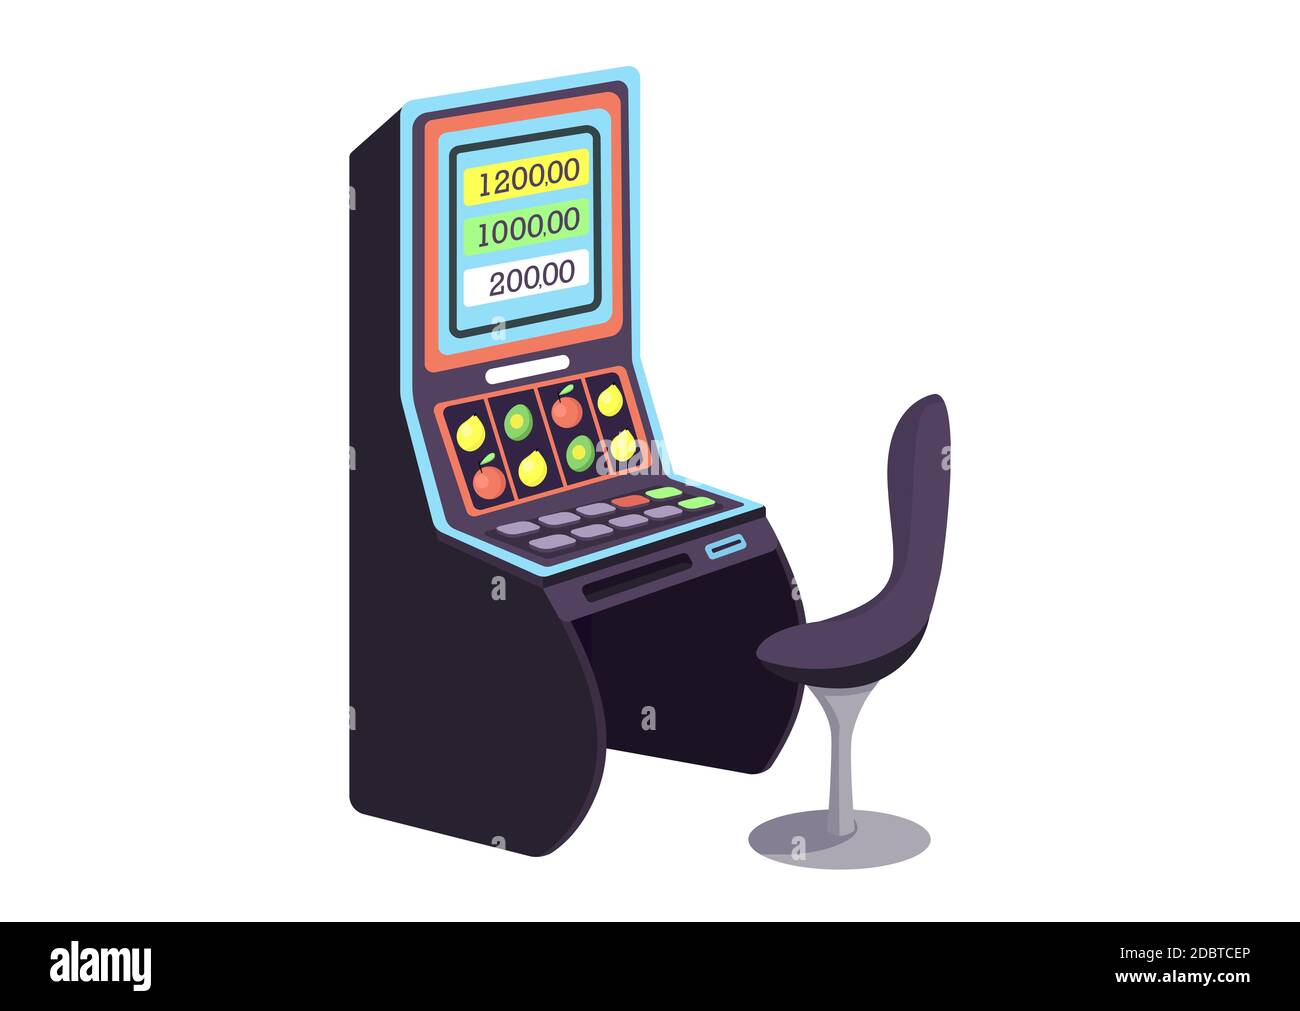 Casino cartoon vector illustration. Fruit machine flat color object. Gambling entertainment. Make bets in lottery. Count odds to win jackpot. Slot mac Stock Photo